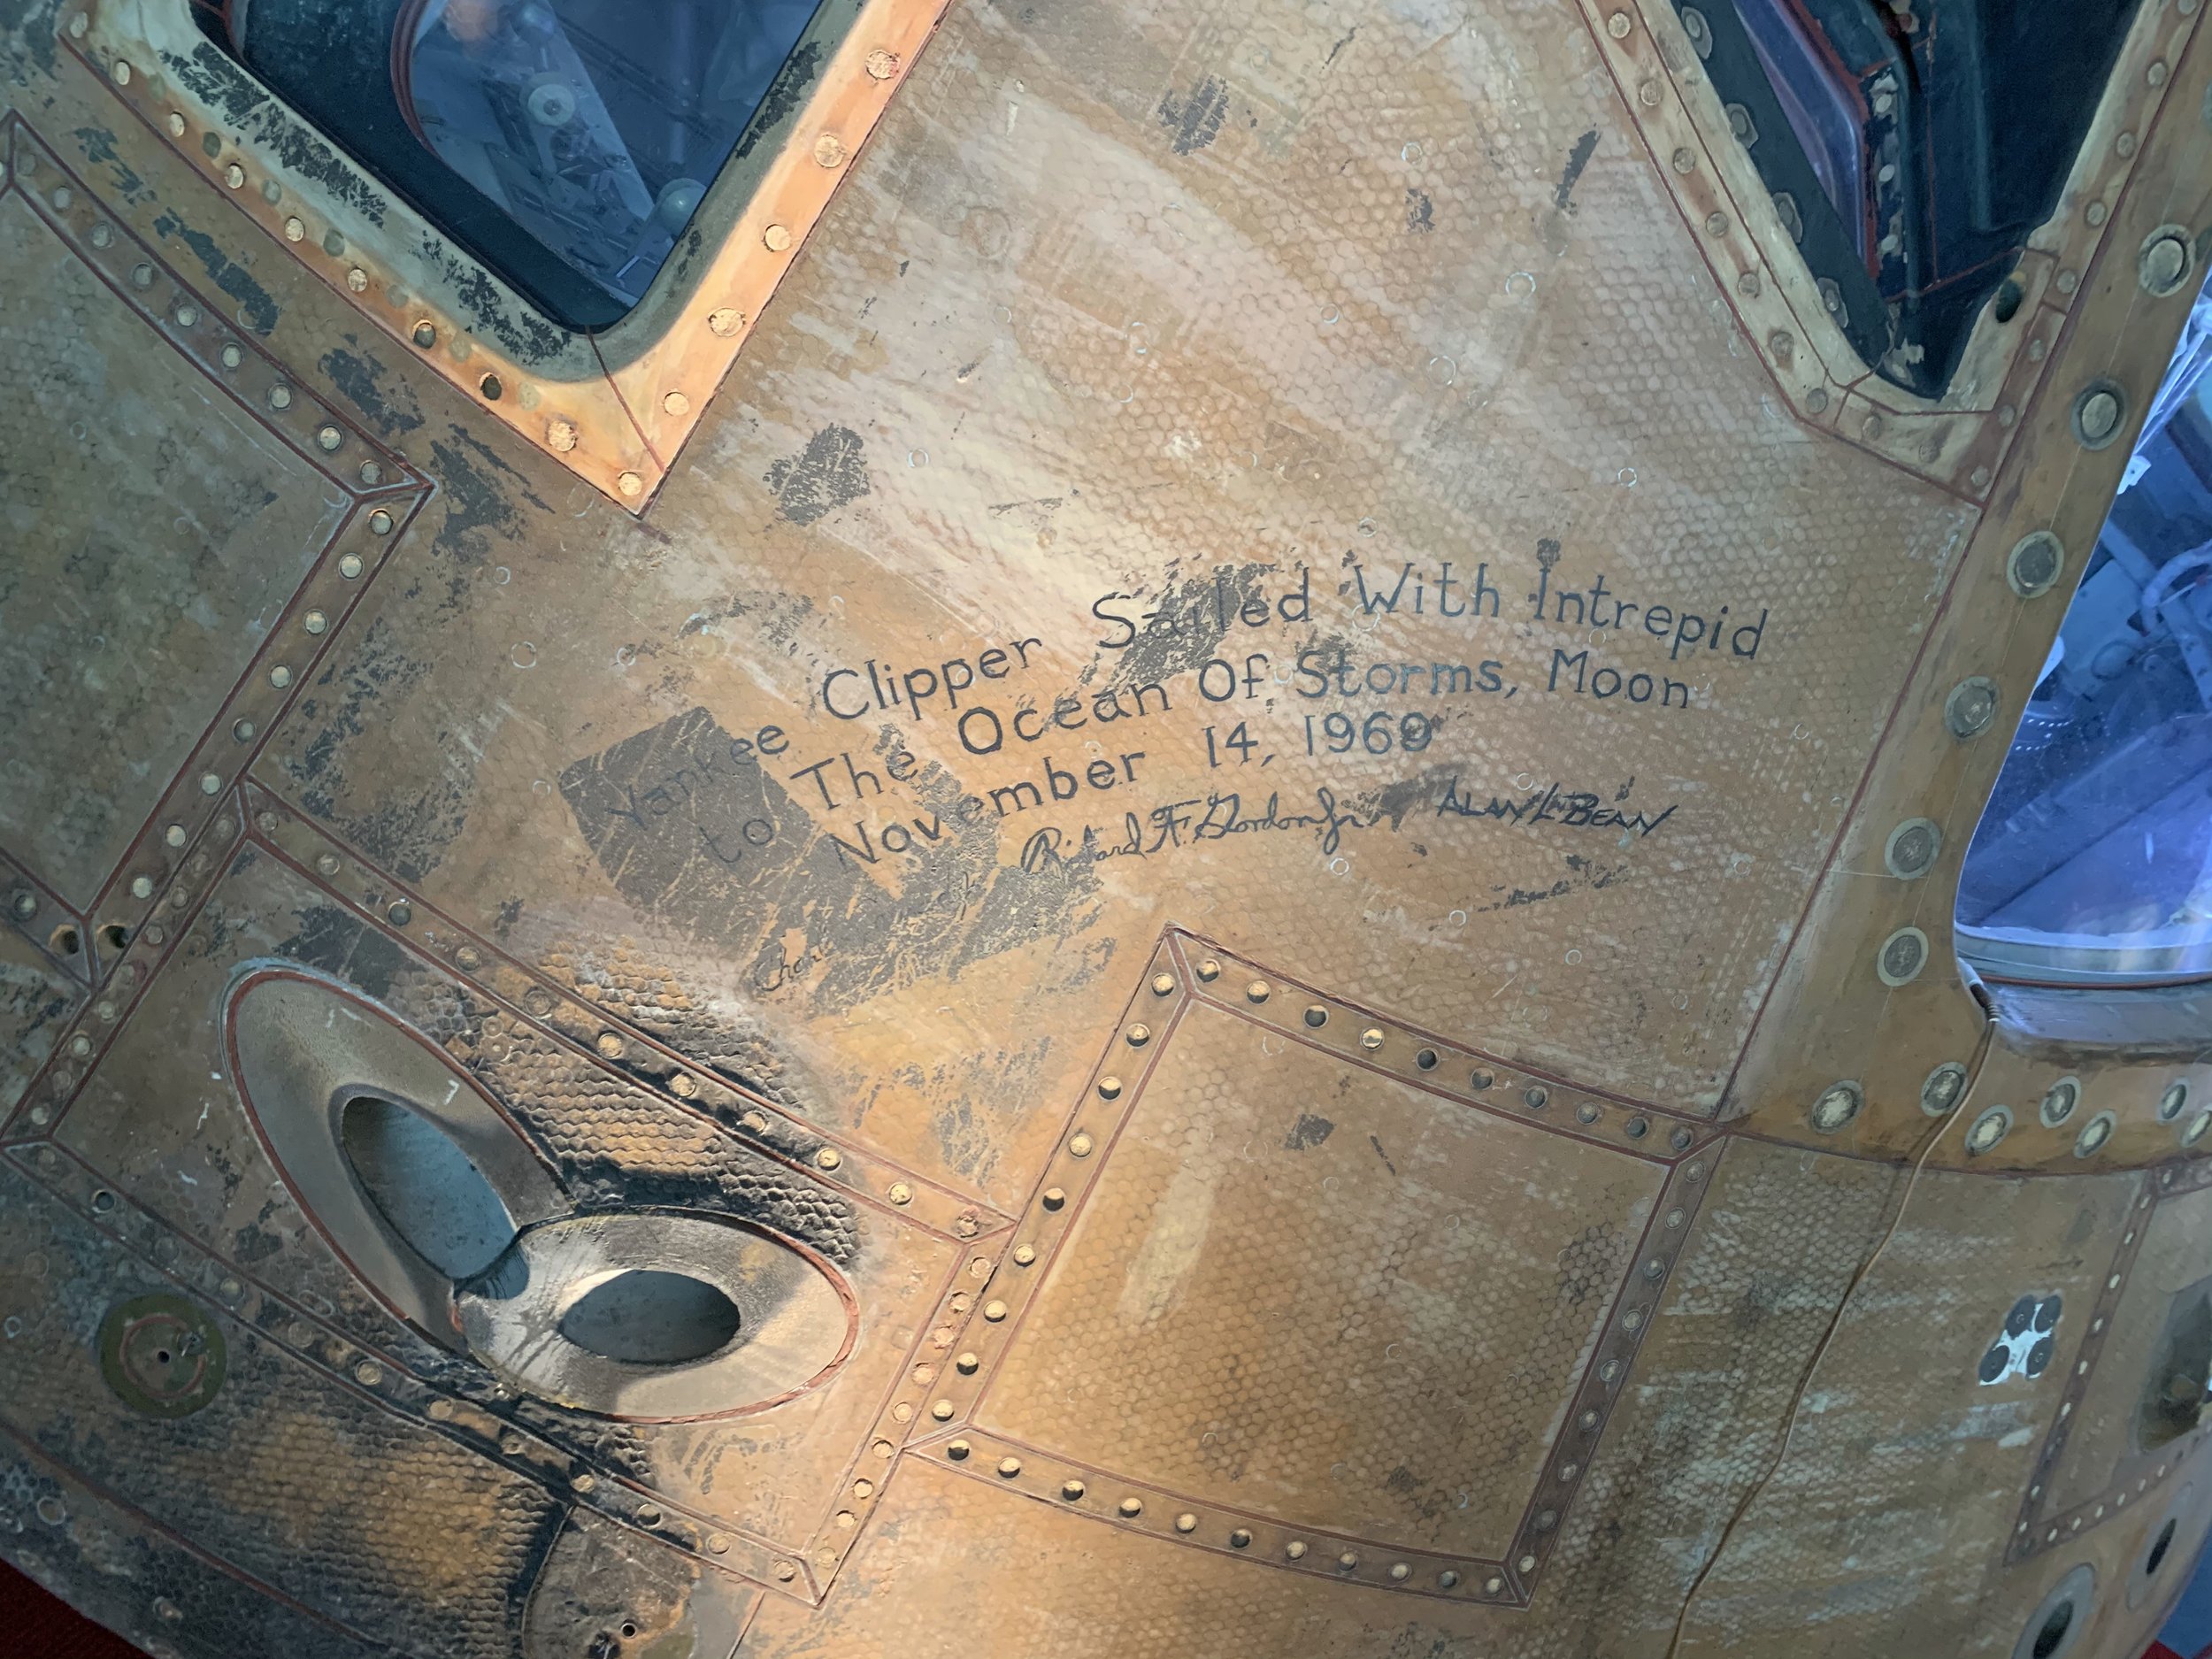 Close-Up of the Astronaut's Autographs